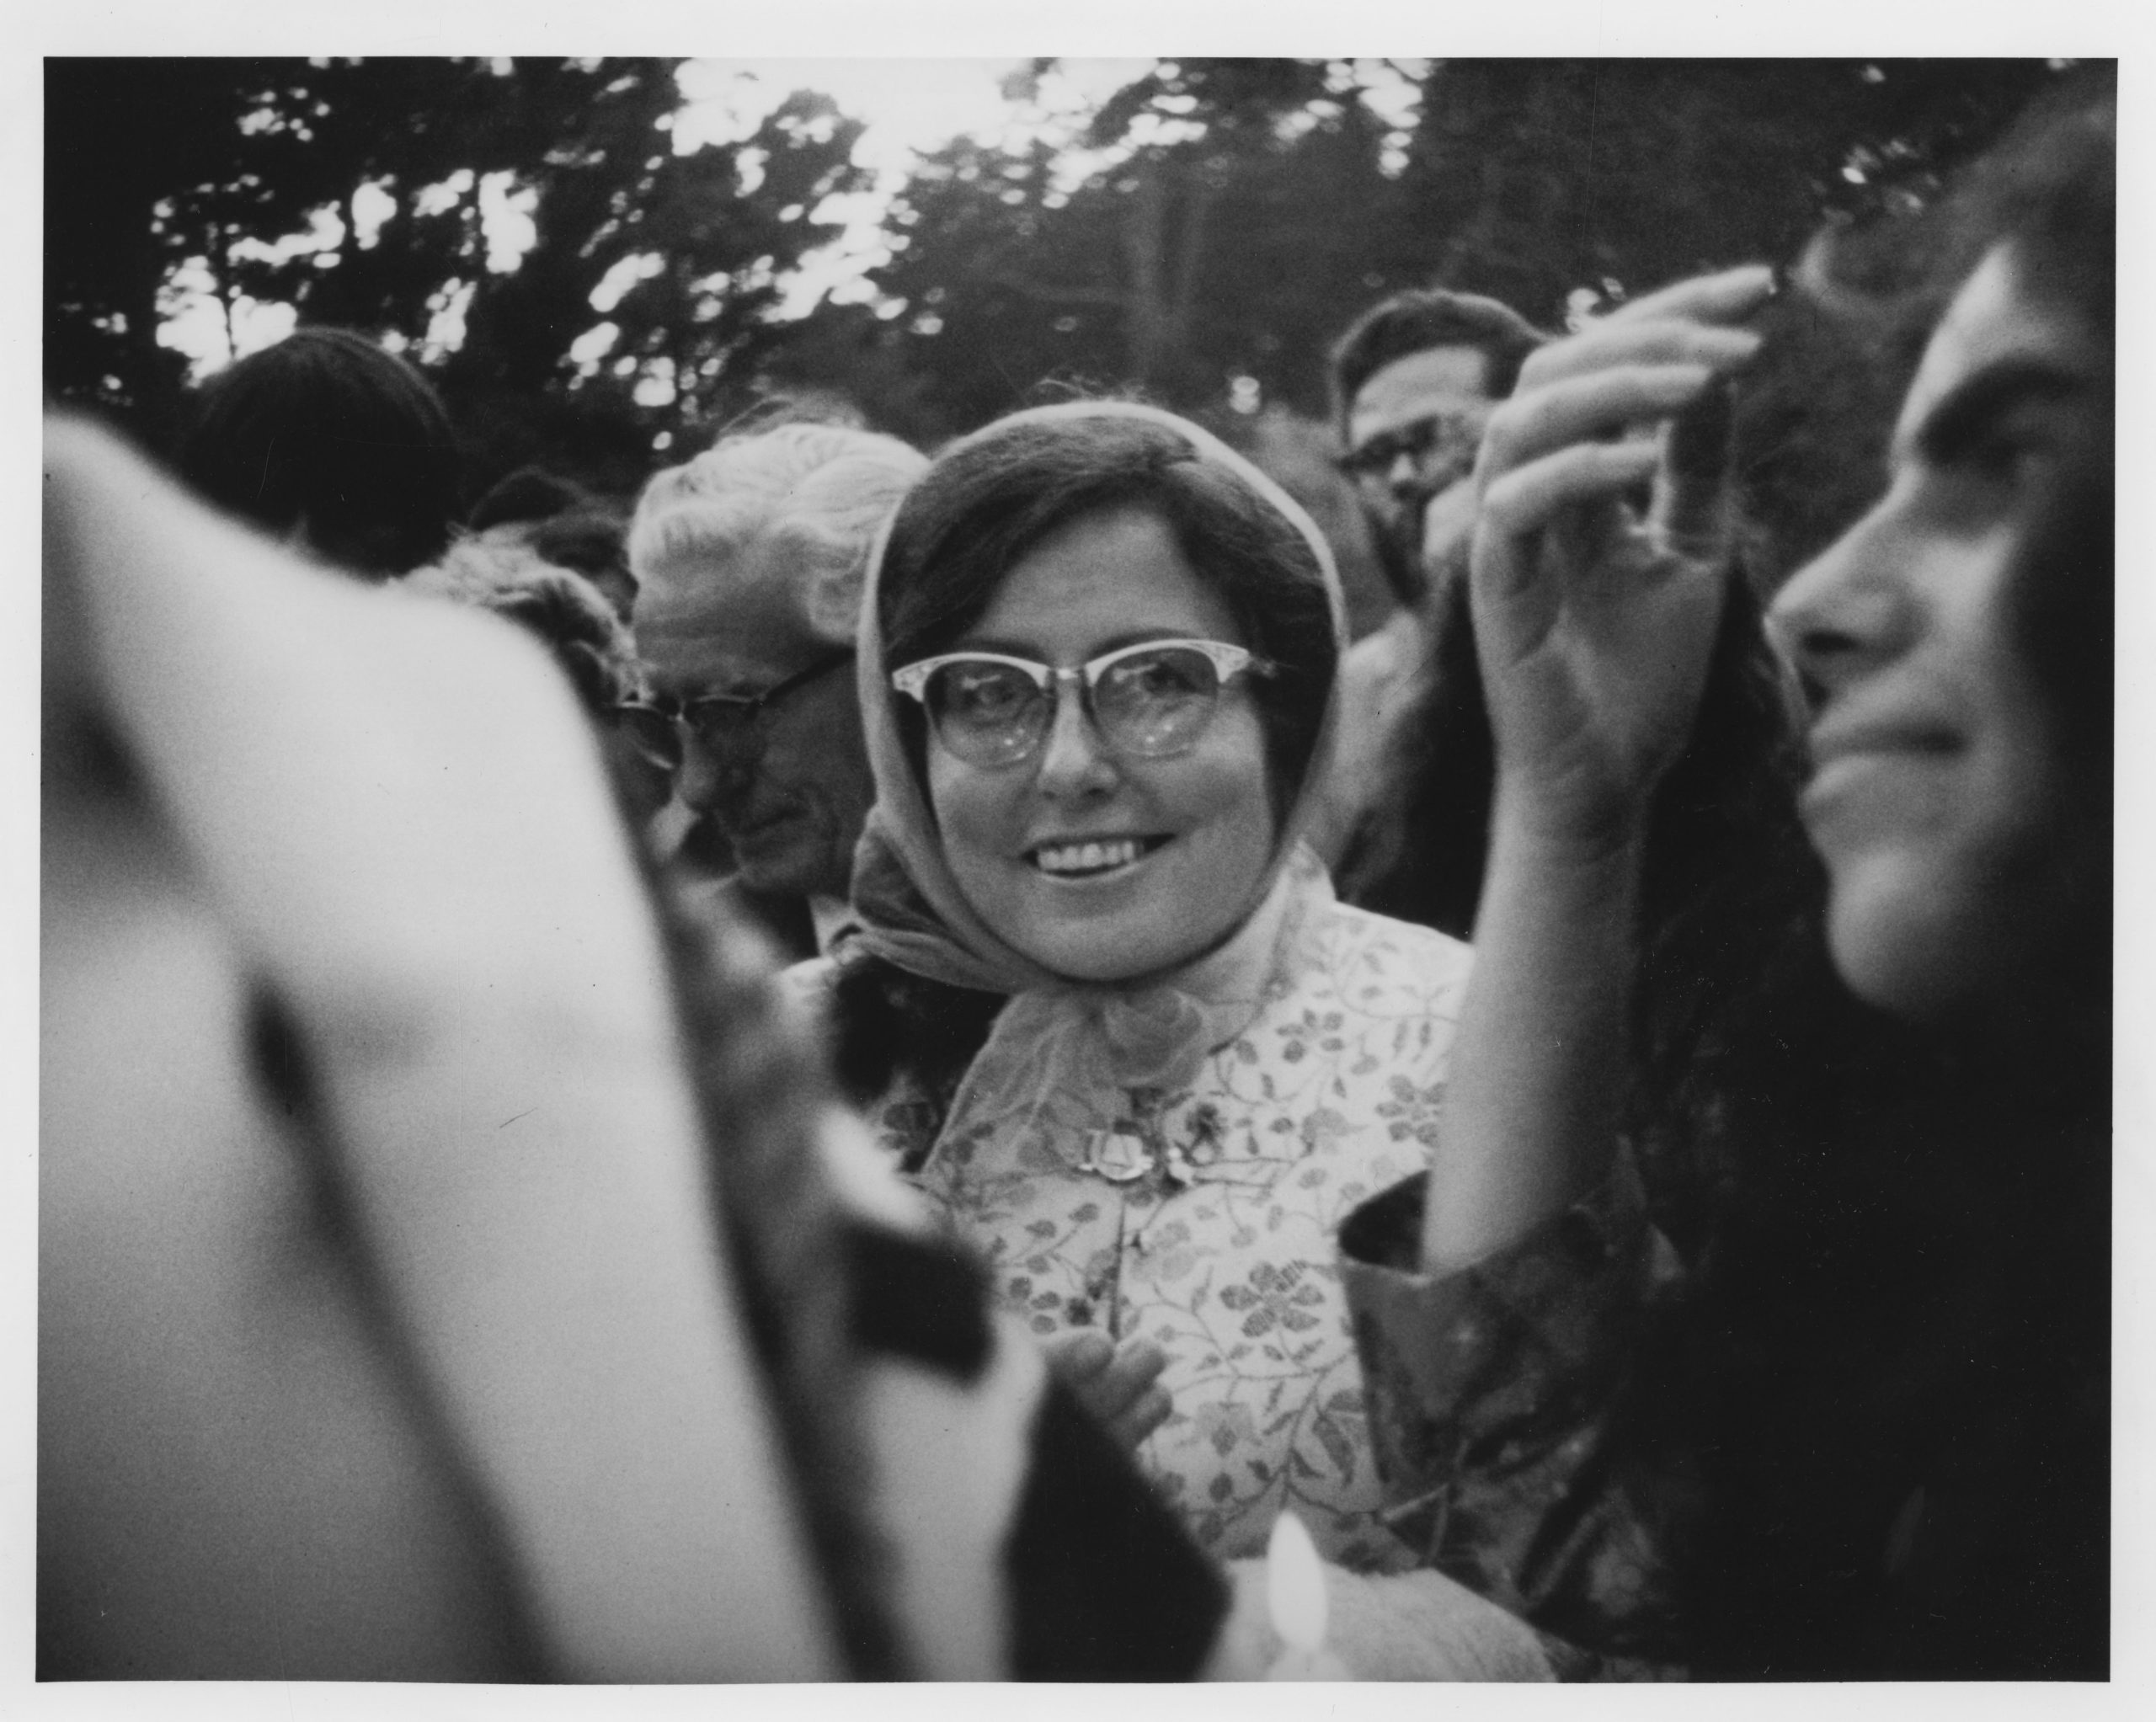 Louise Berky at the House of Love and Prayer wedding featured in Life Magazine, September 1969. Photo by Marvin Kussoy, courtesy of Yehudit and Reuven Goldfarb.